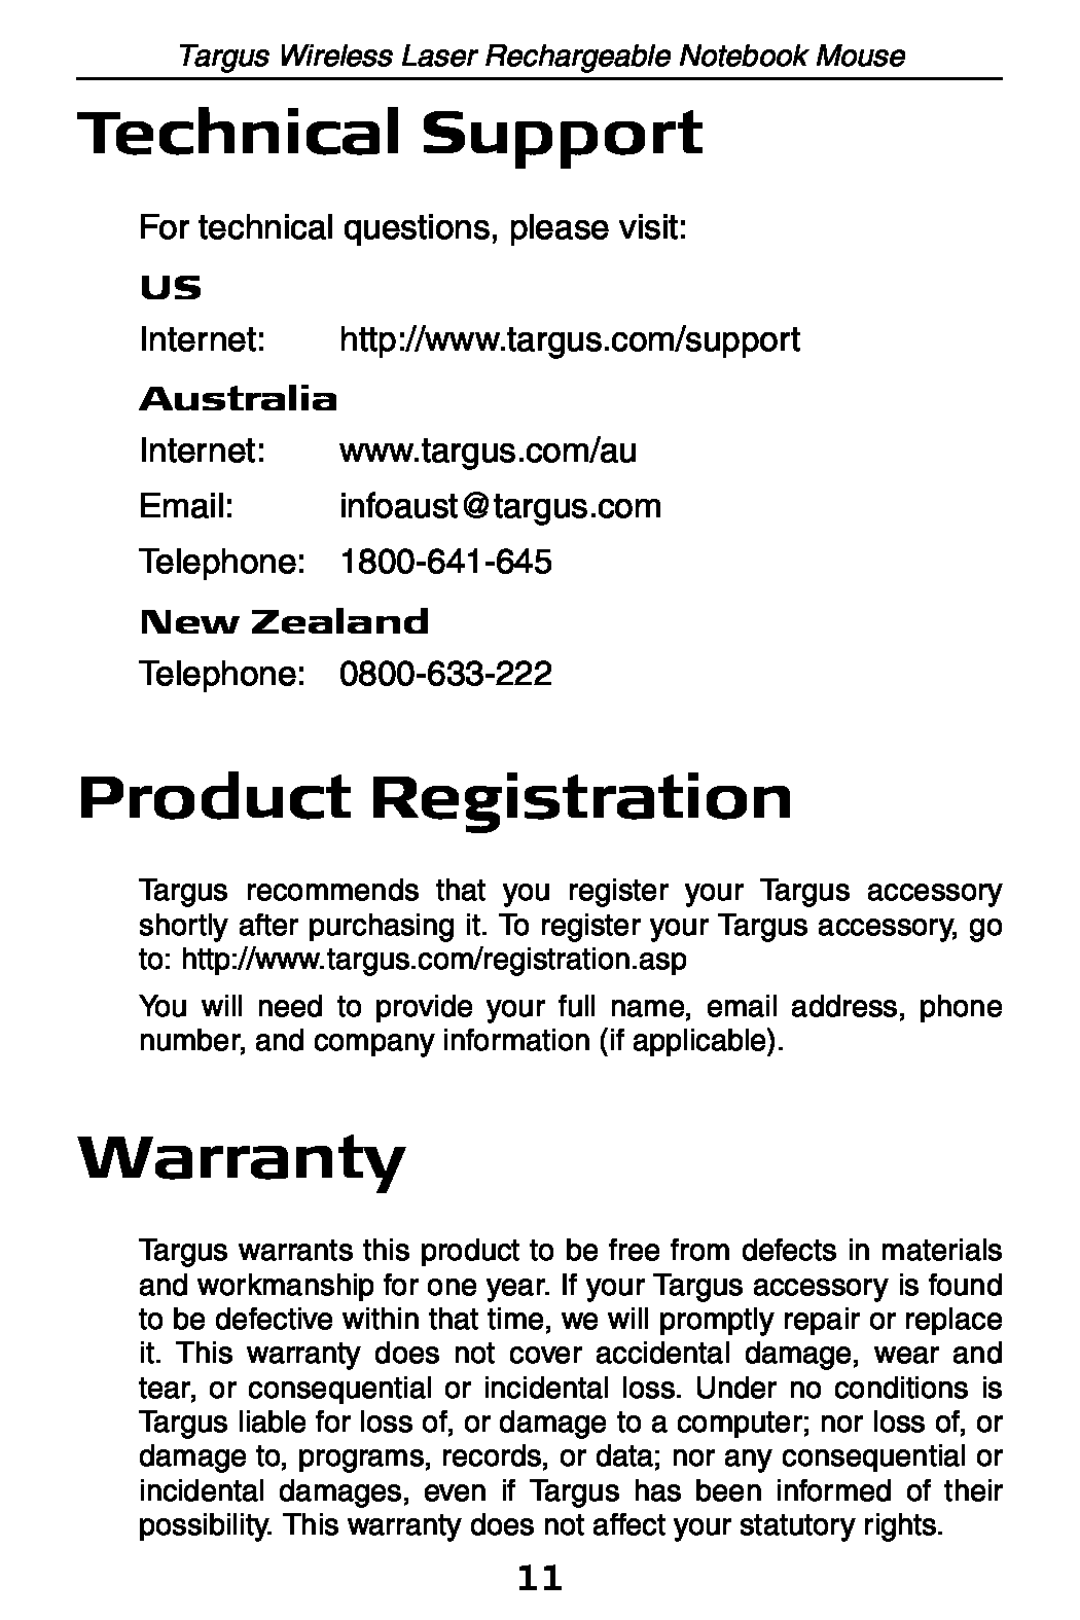 Targus 410-0008-001A manual Technical Support, Product Registration, Warranty, Australia, New Zealand 